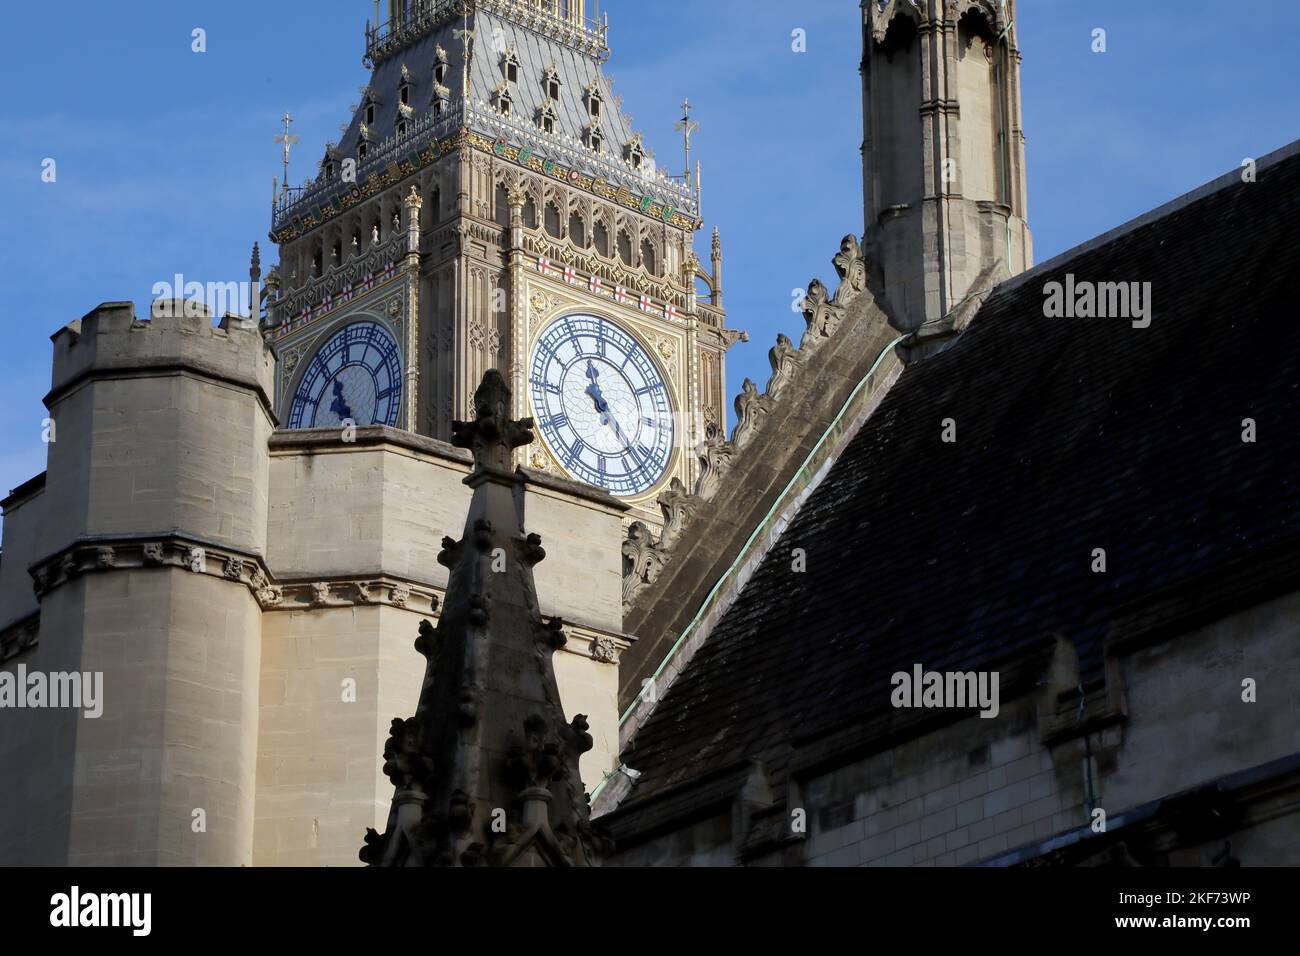 The clock of Big Ben in the Palace of Westminster in London, England on 16 November 2022 Stock Photo